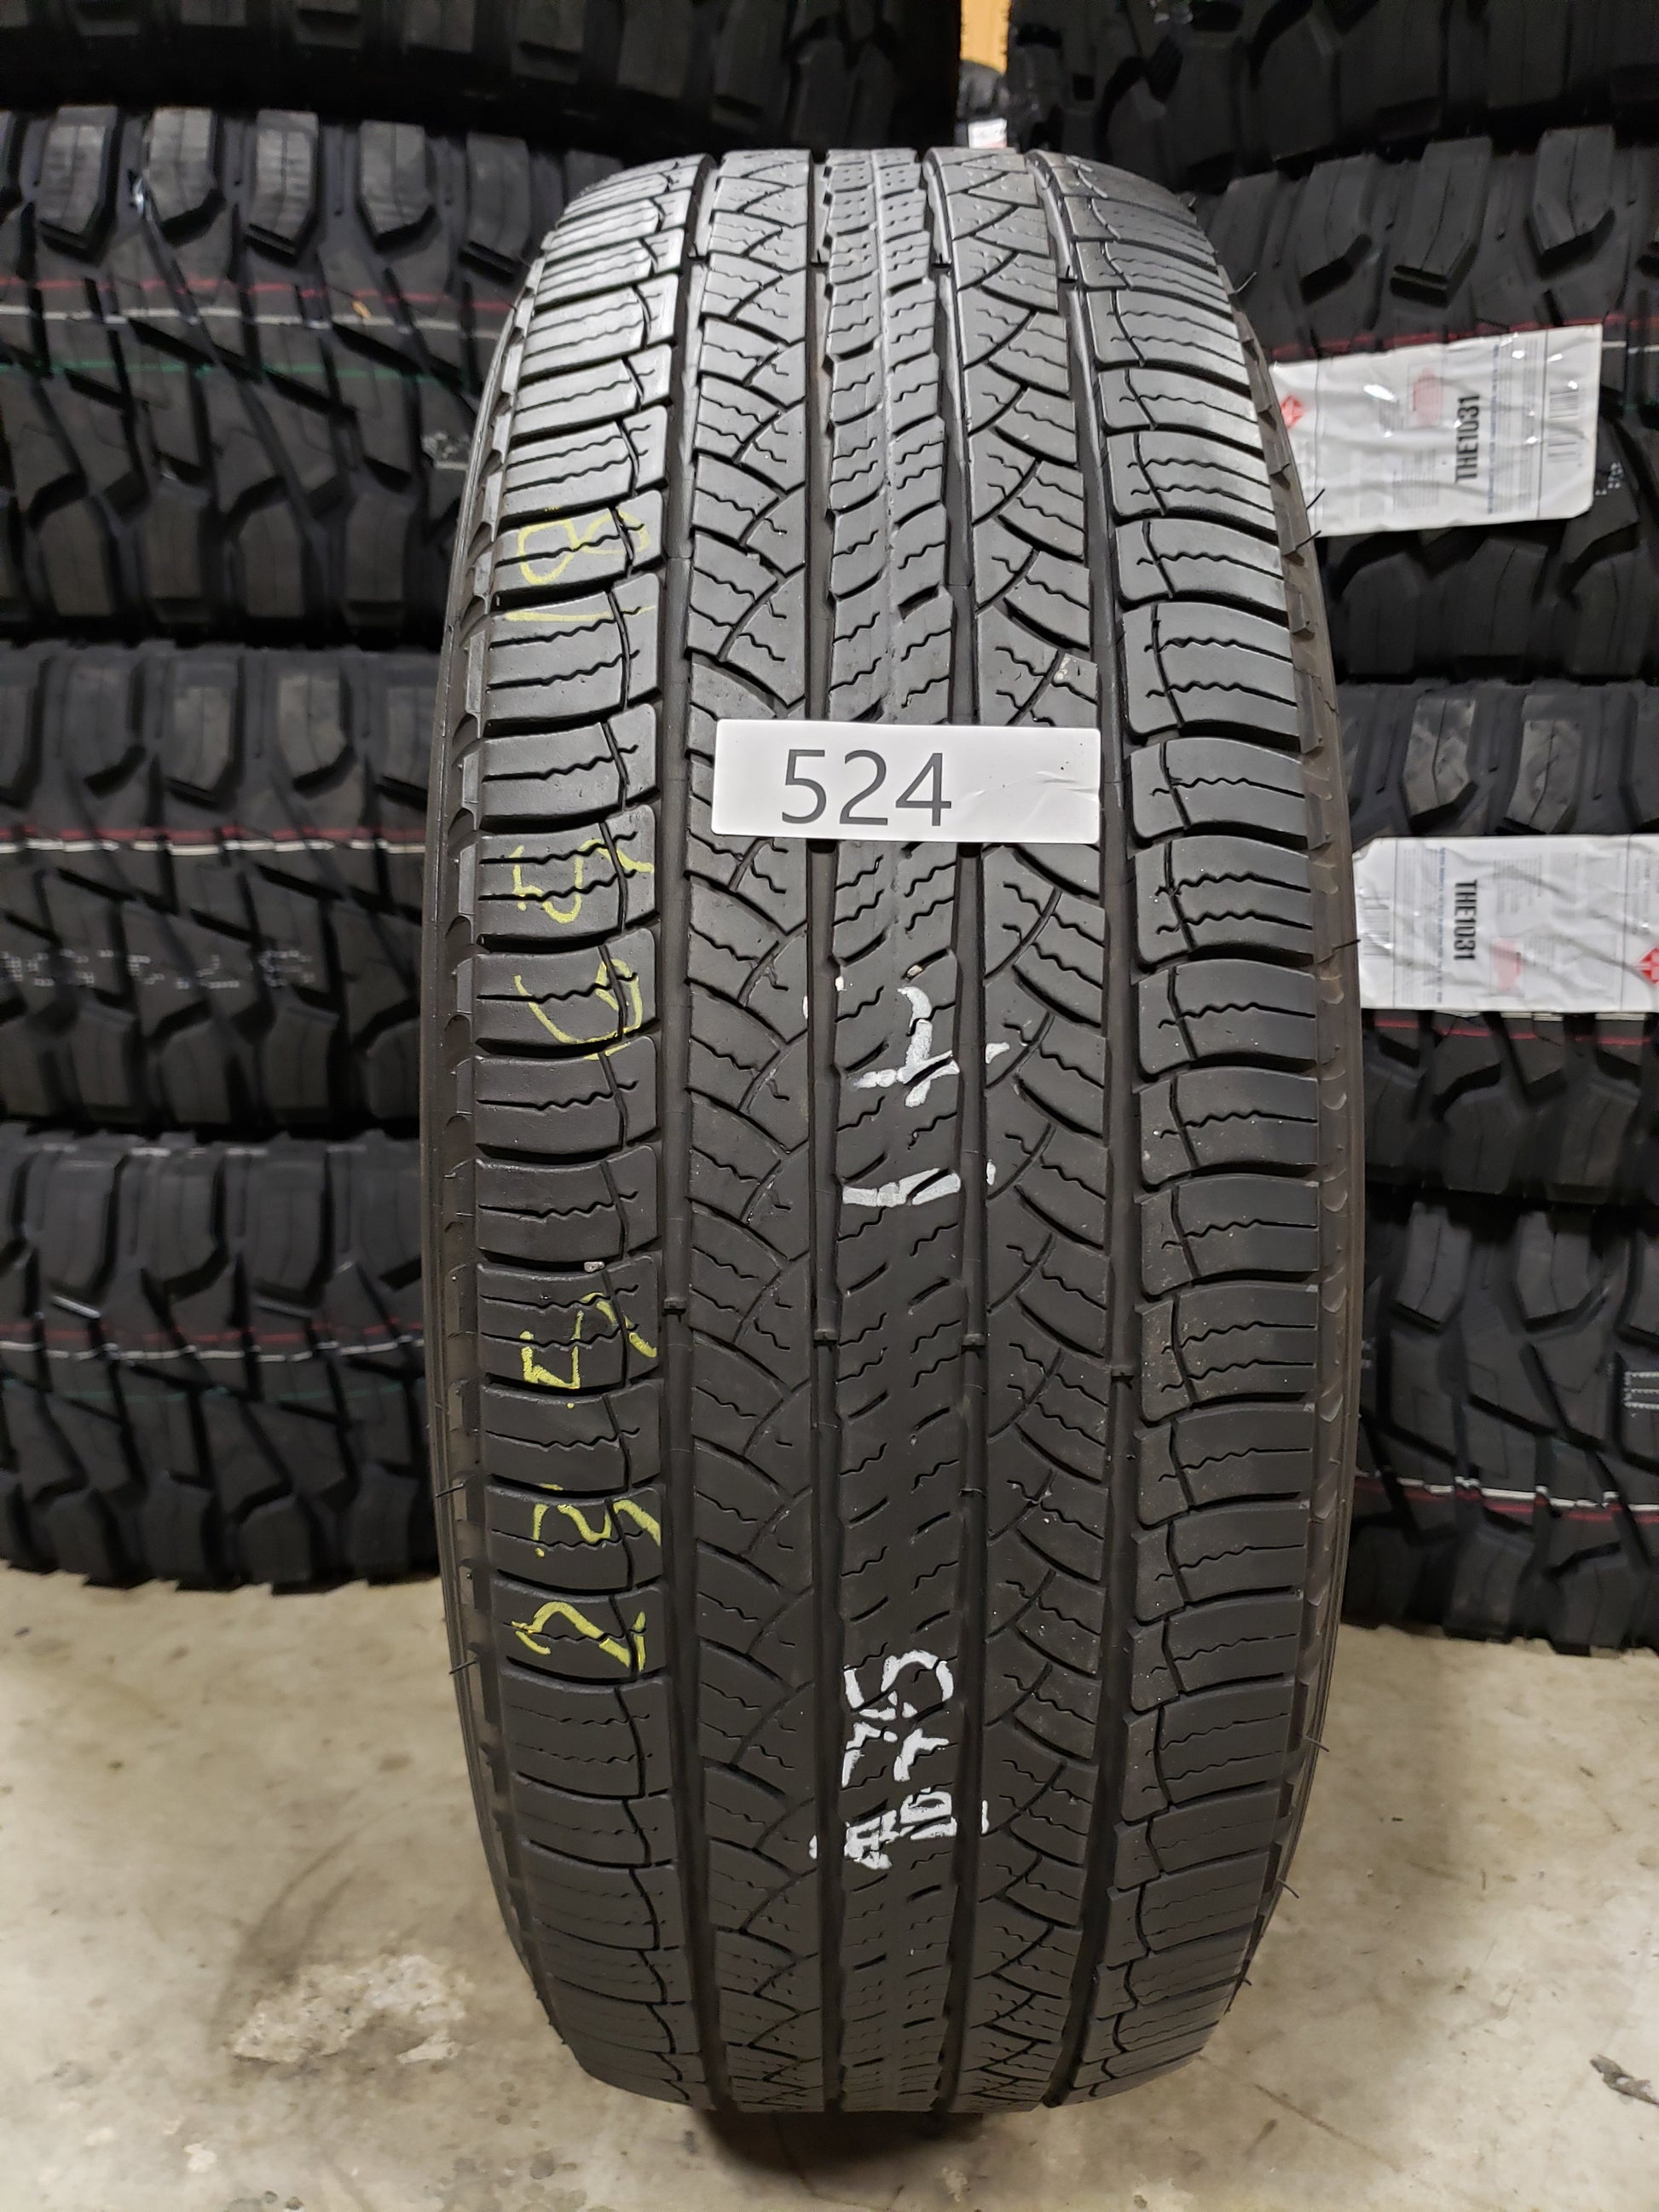 SET OF 4 235/65R18 Michelin LATITUDE TOUR 106 T - Used Tires